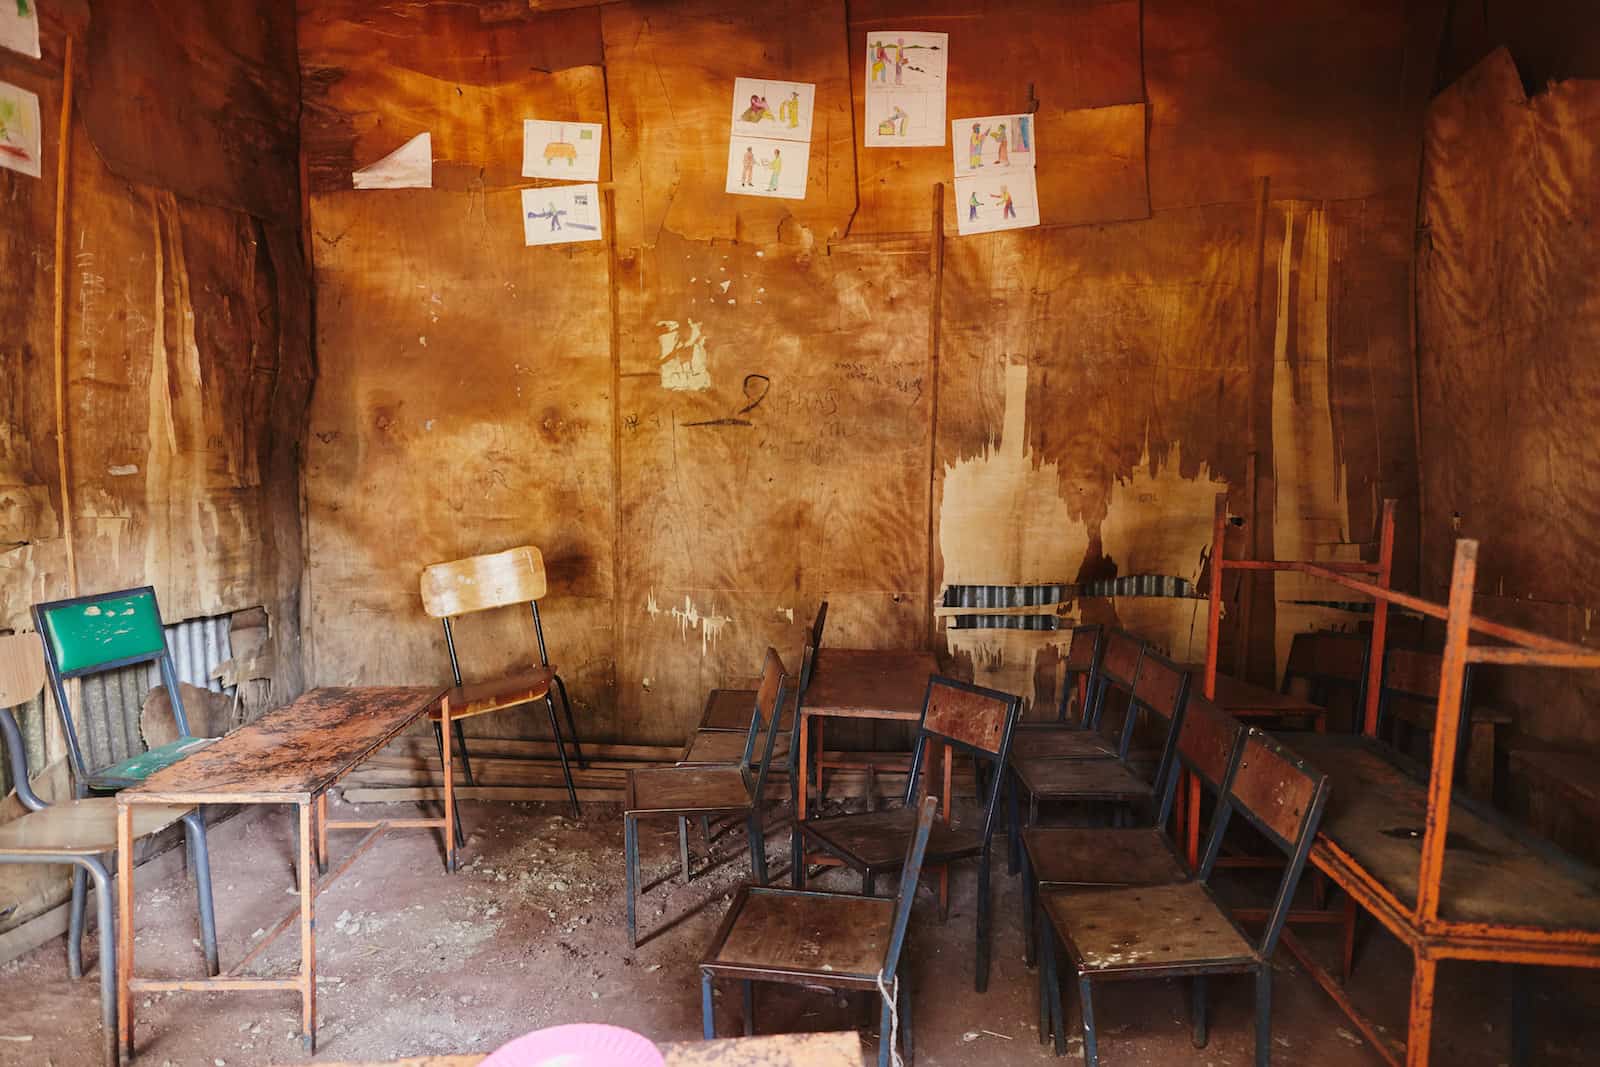 A classroom with dirt floors, plywood walls and cramped chairs.